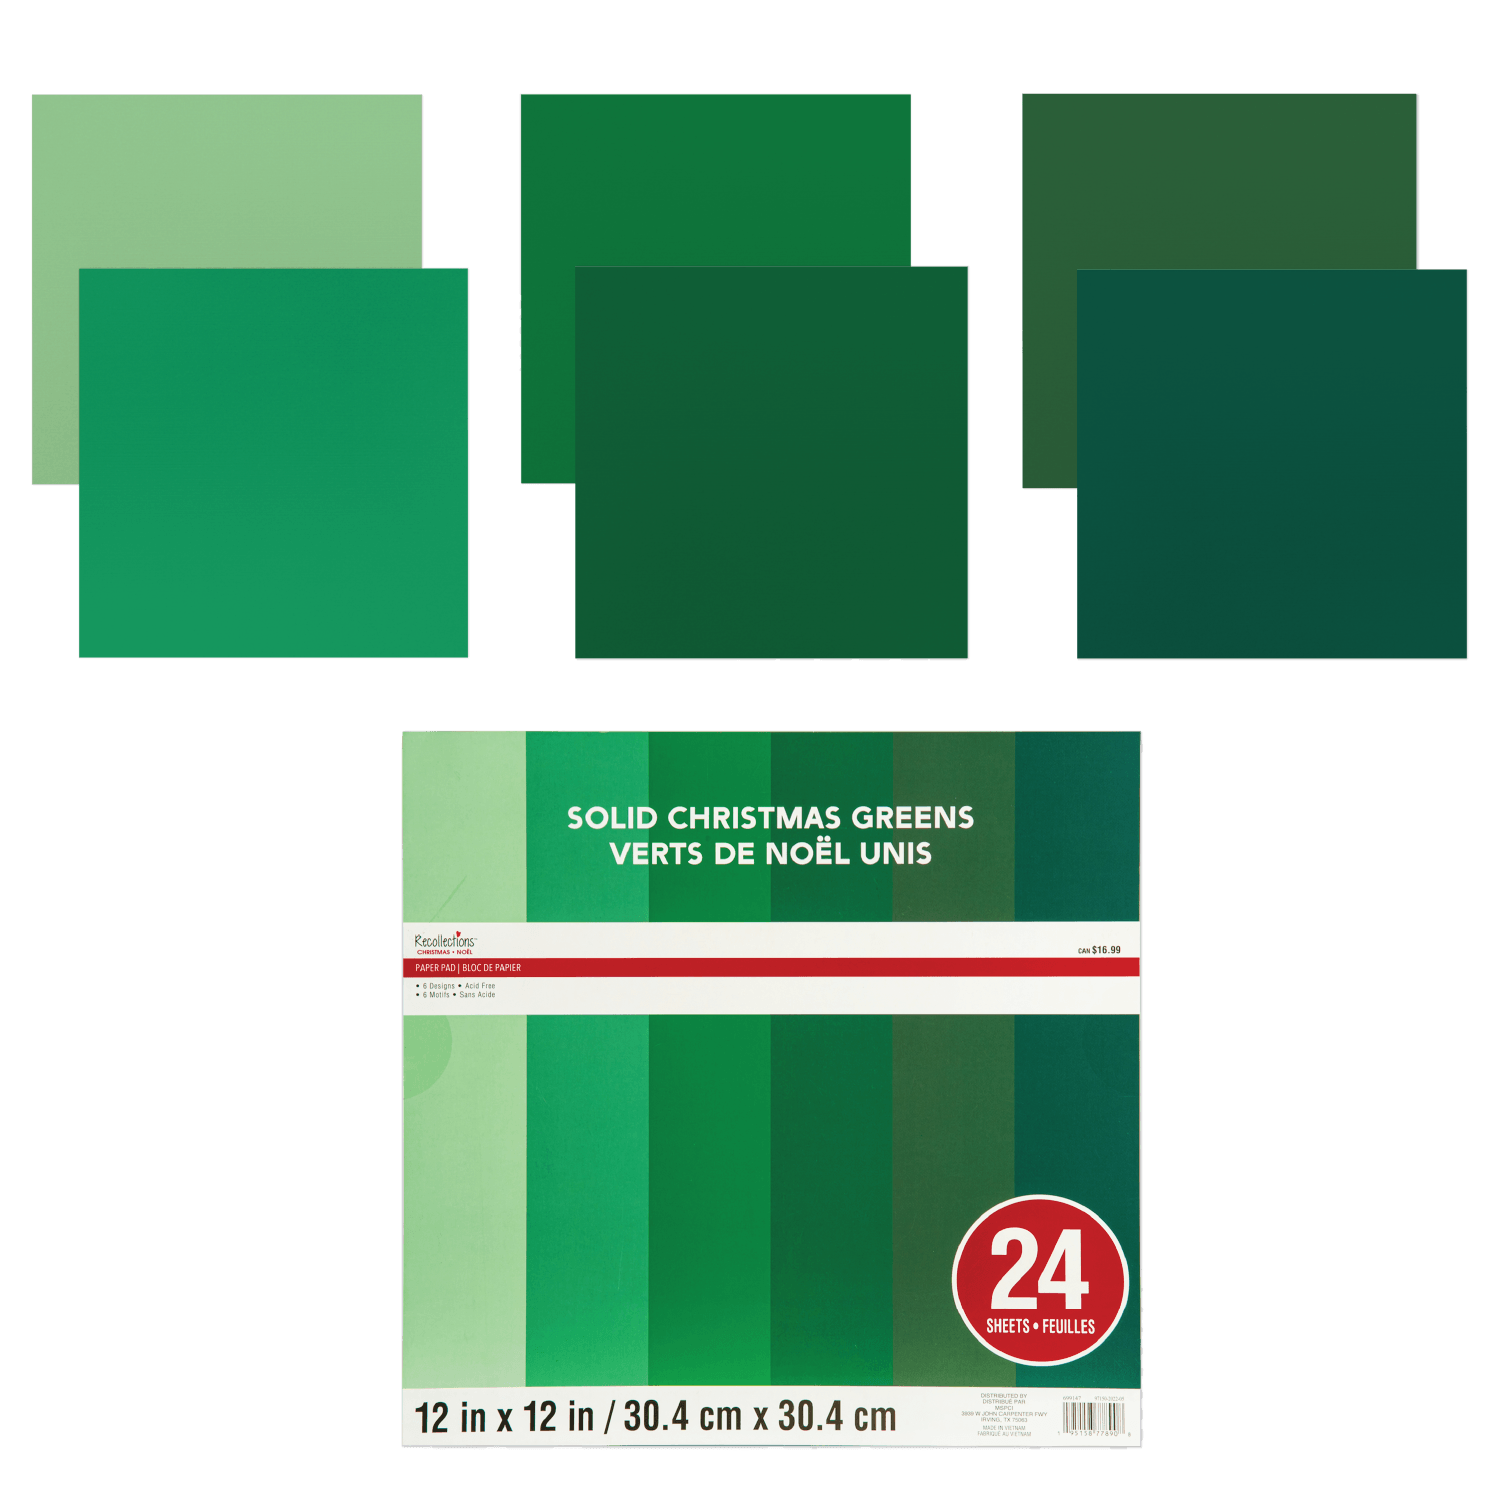 Recollections 12 Pack: Forest Cardstock Paper Pad, 8.5 x 11